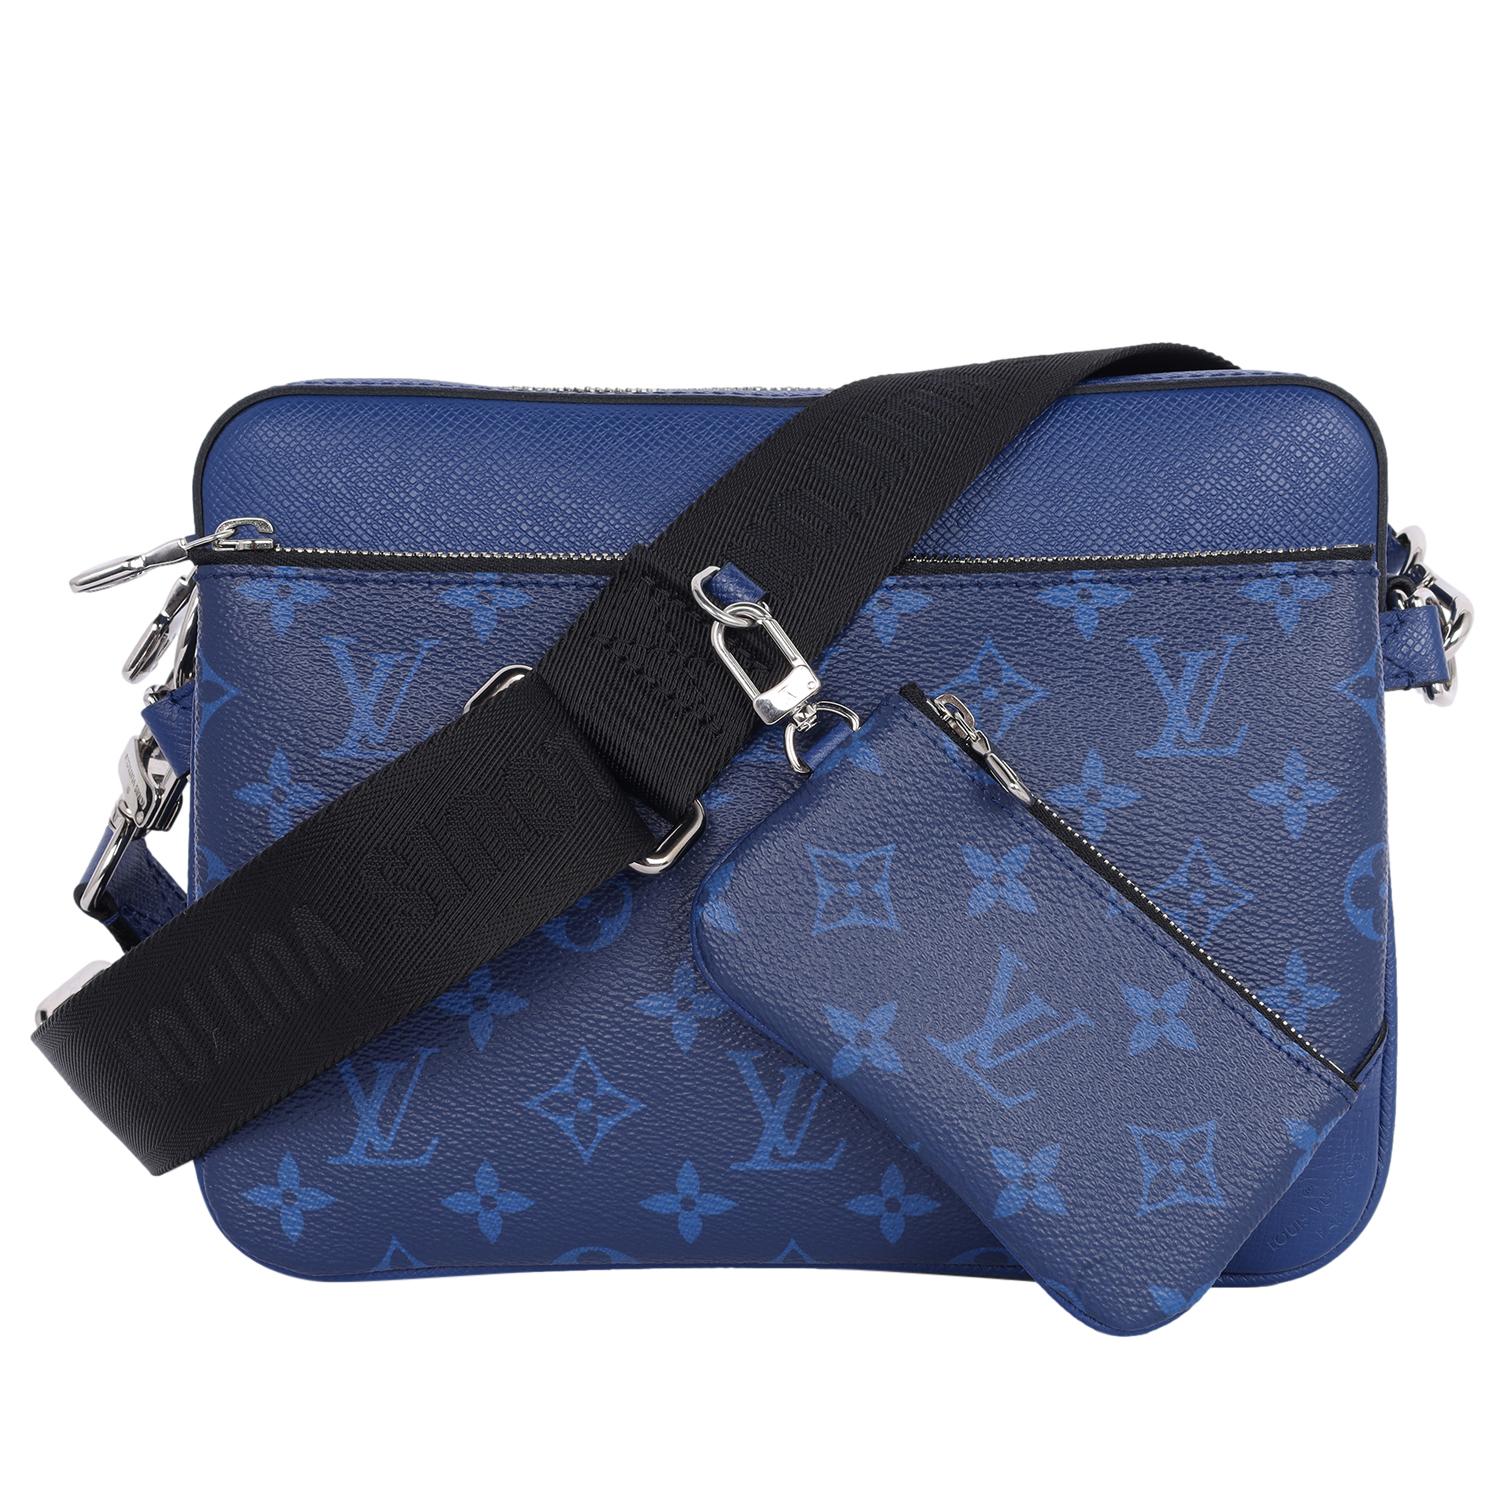 Authentic, pre-loved Louis Vuitton Trio Messenger Bag in blue cobalt. Features messenger-crossbody style bag with dark blue monogram coated canvas. There are three pieces to this set. There are 2 removable pochette bags, an optional, adjustable